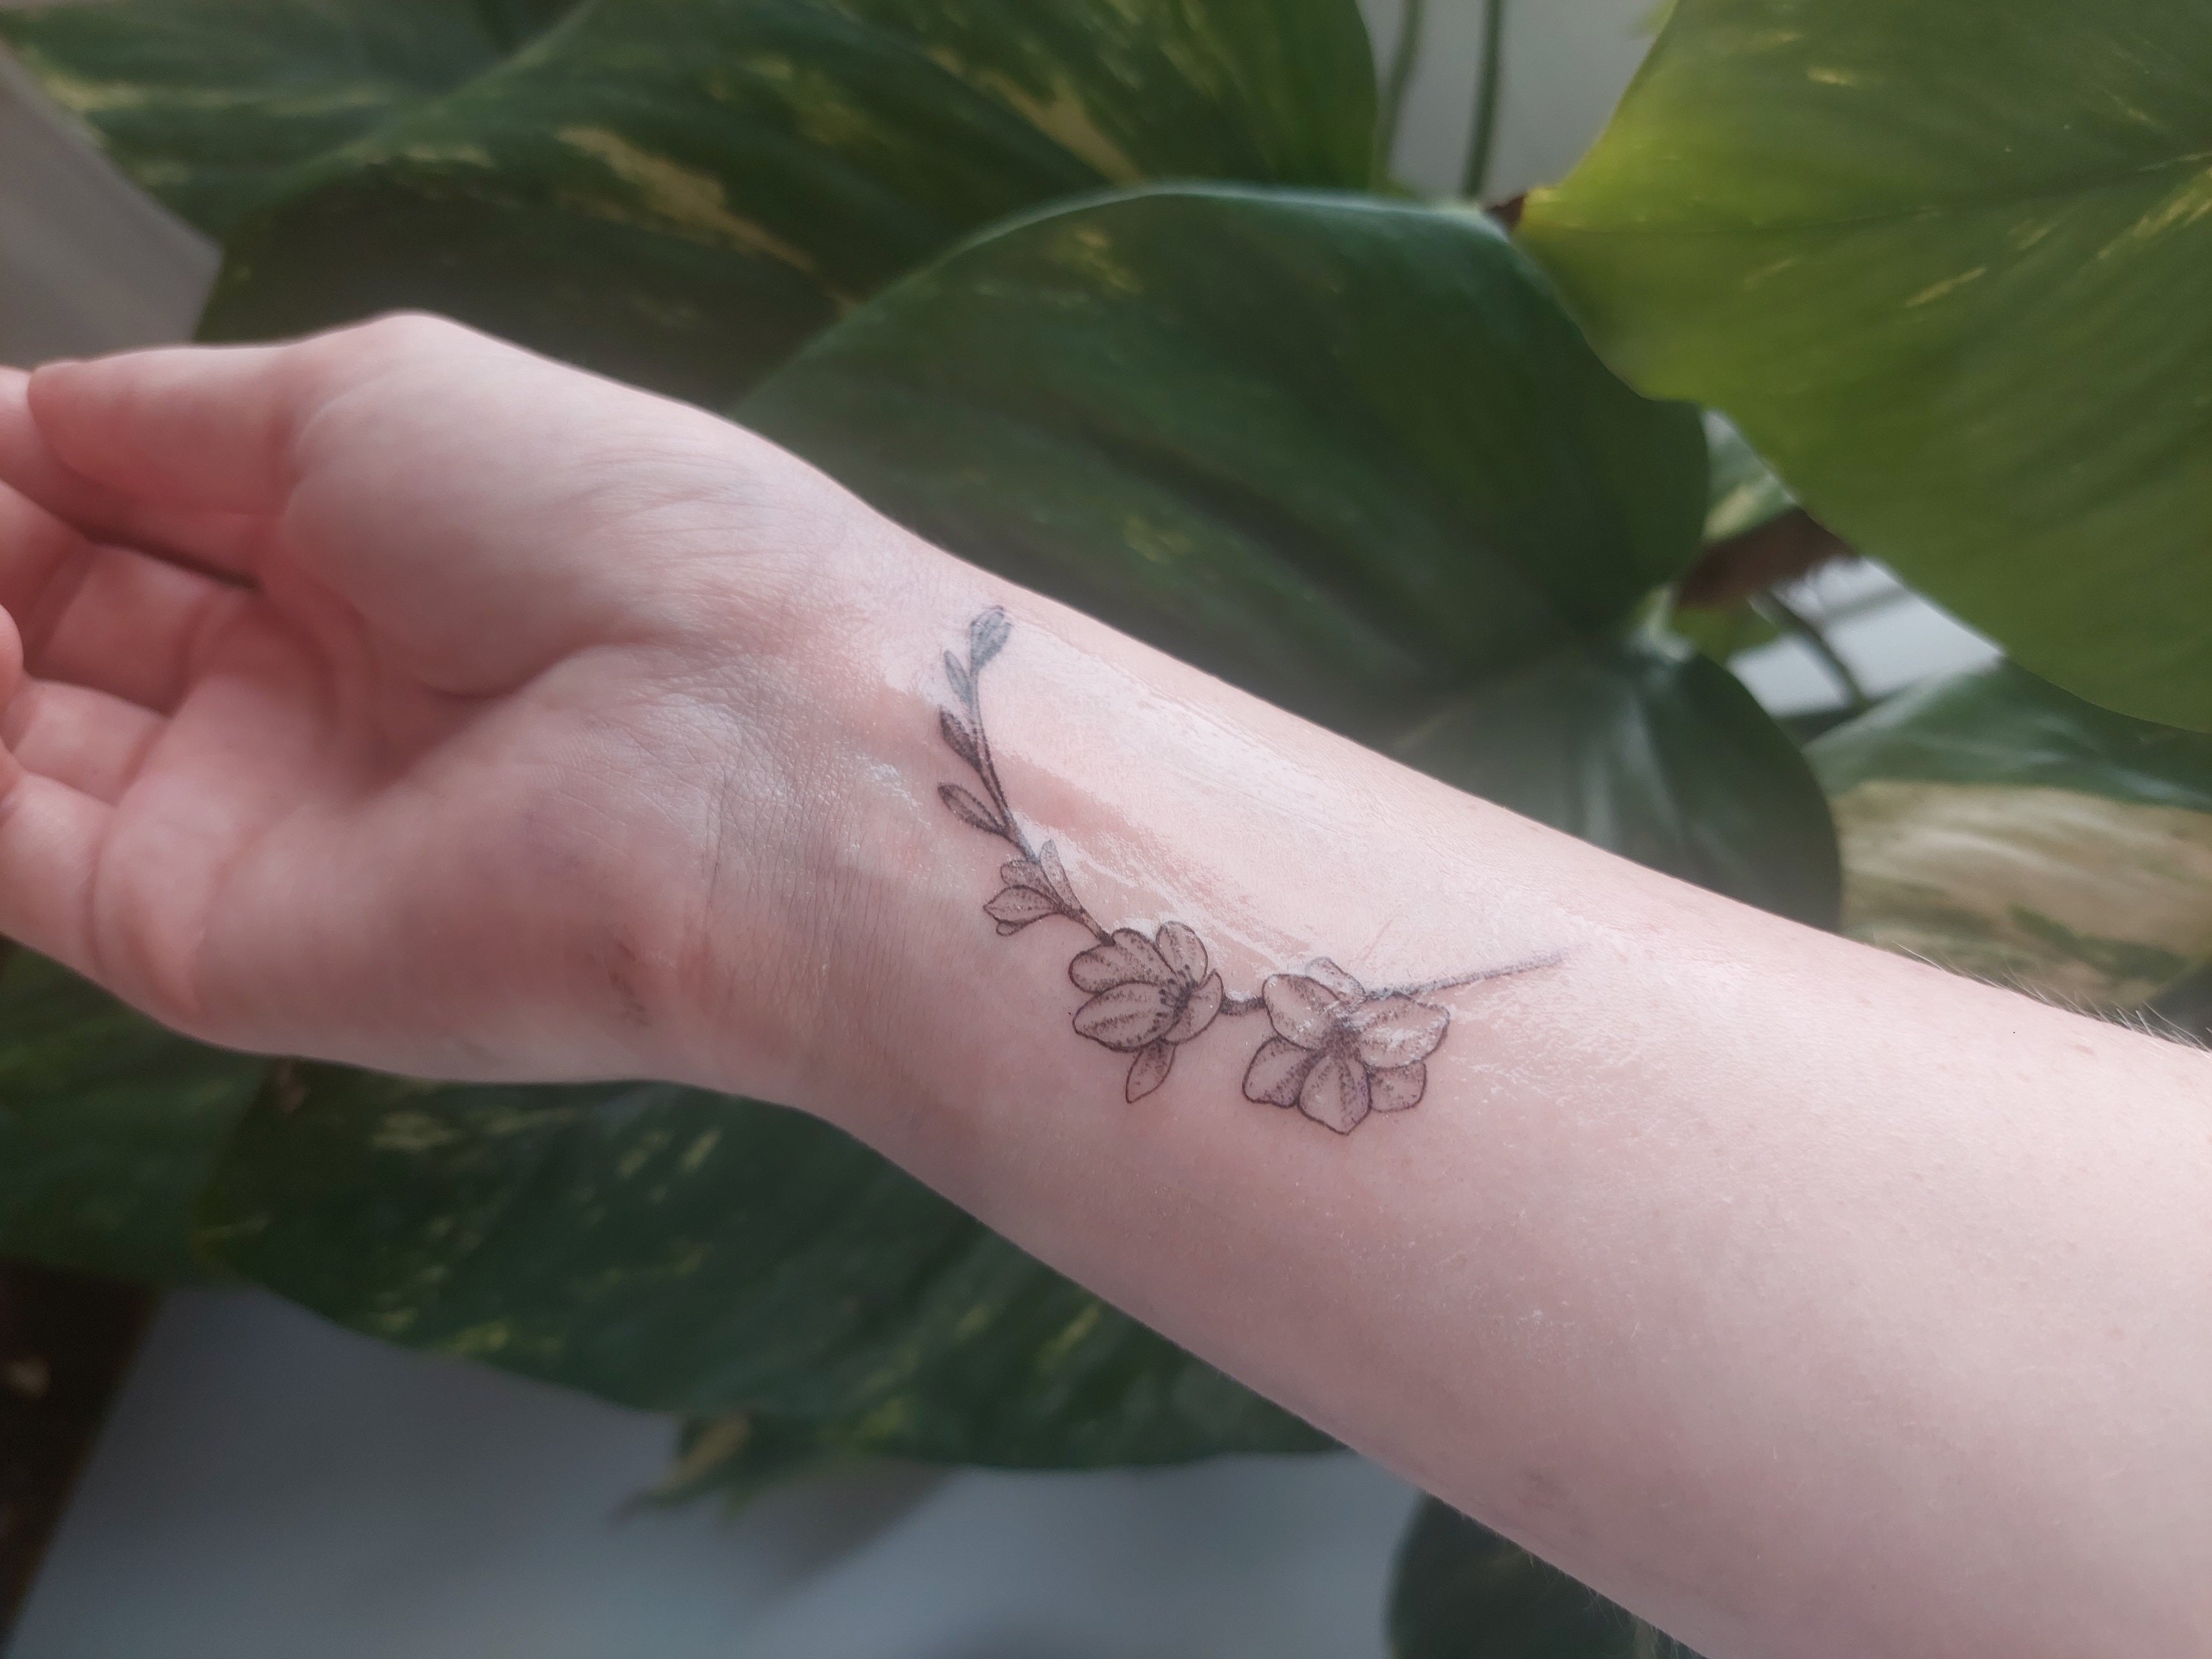 Your Handy Guide To Wrist Tattoos – Stories and Ink